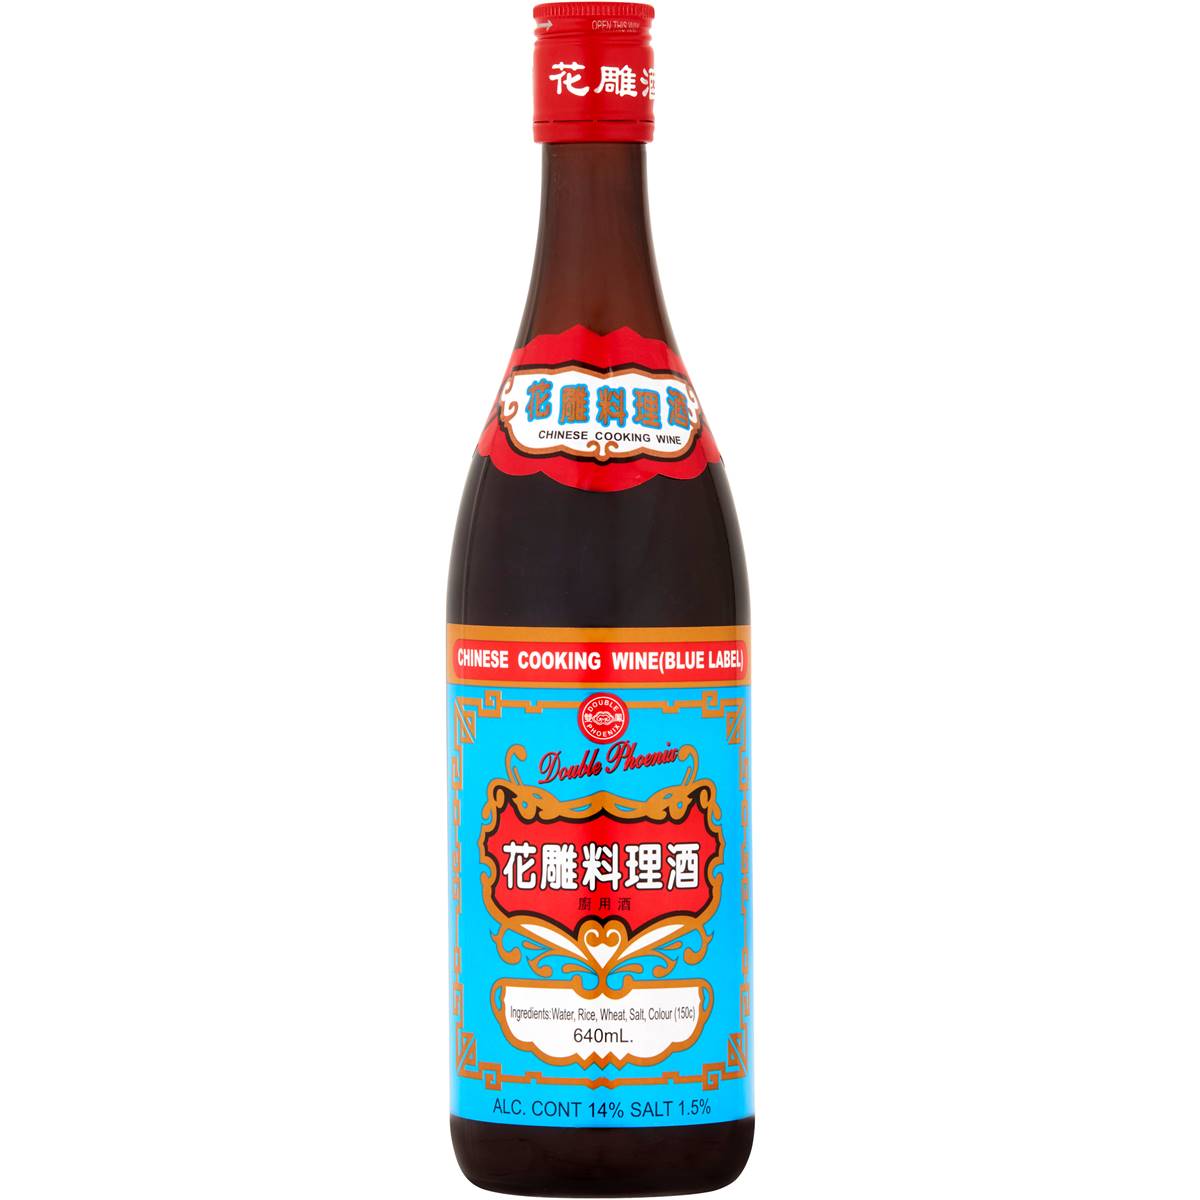 Double Phoenix Chinese Cooking Wine Blue Label 640ml